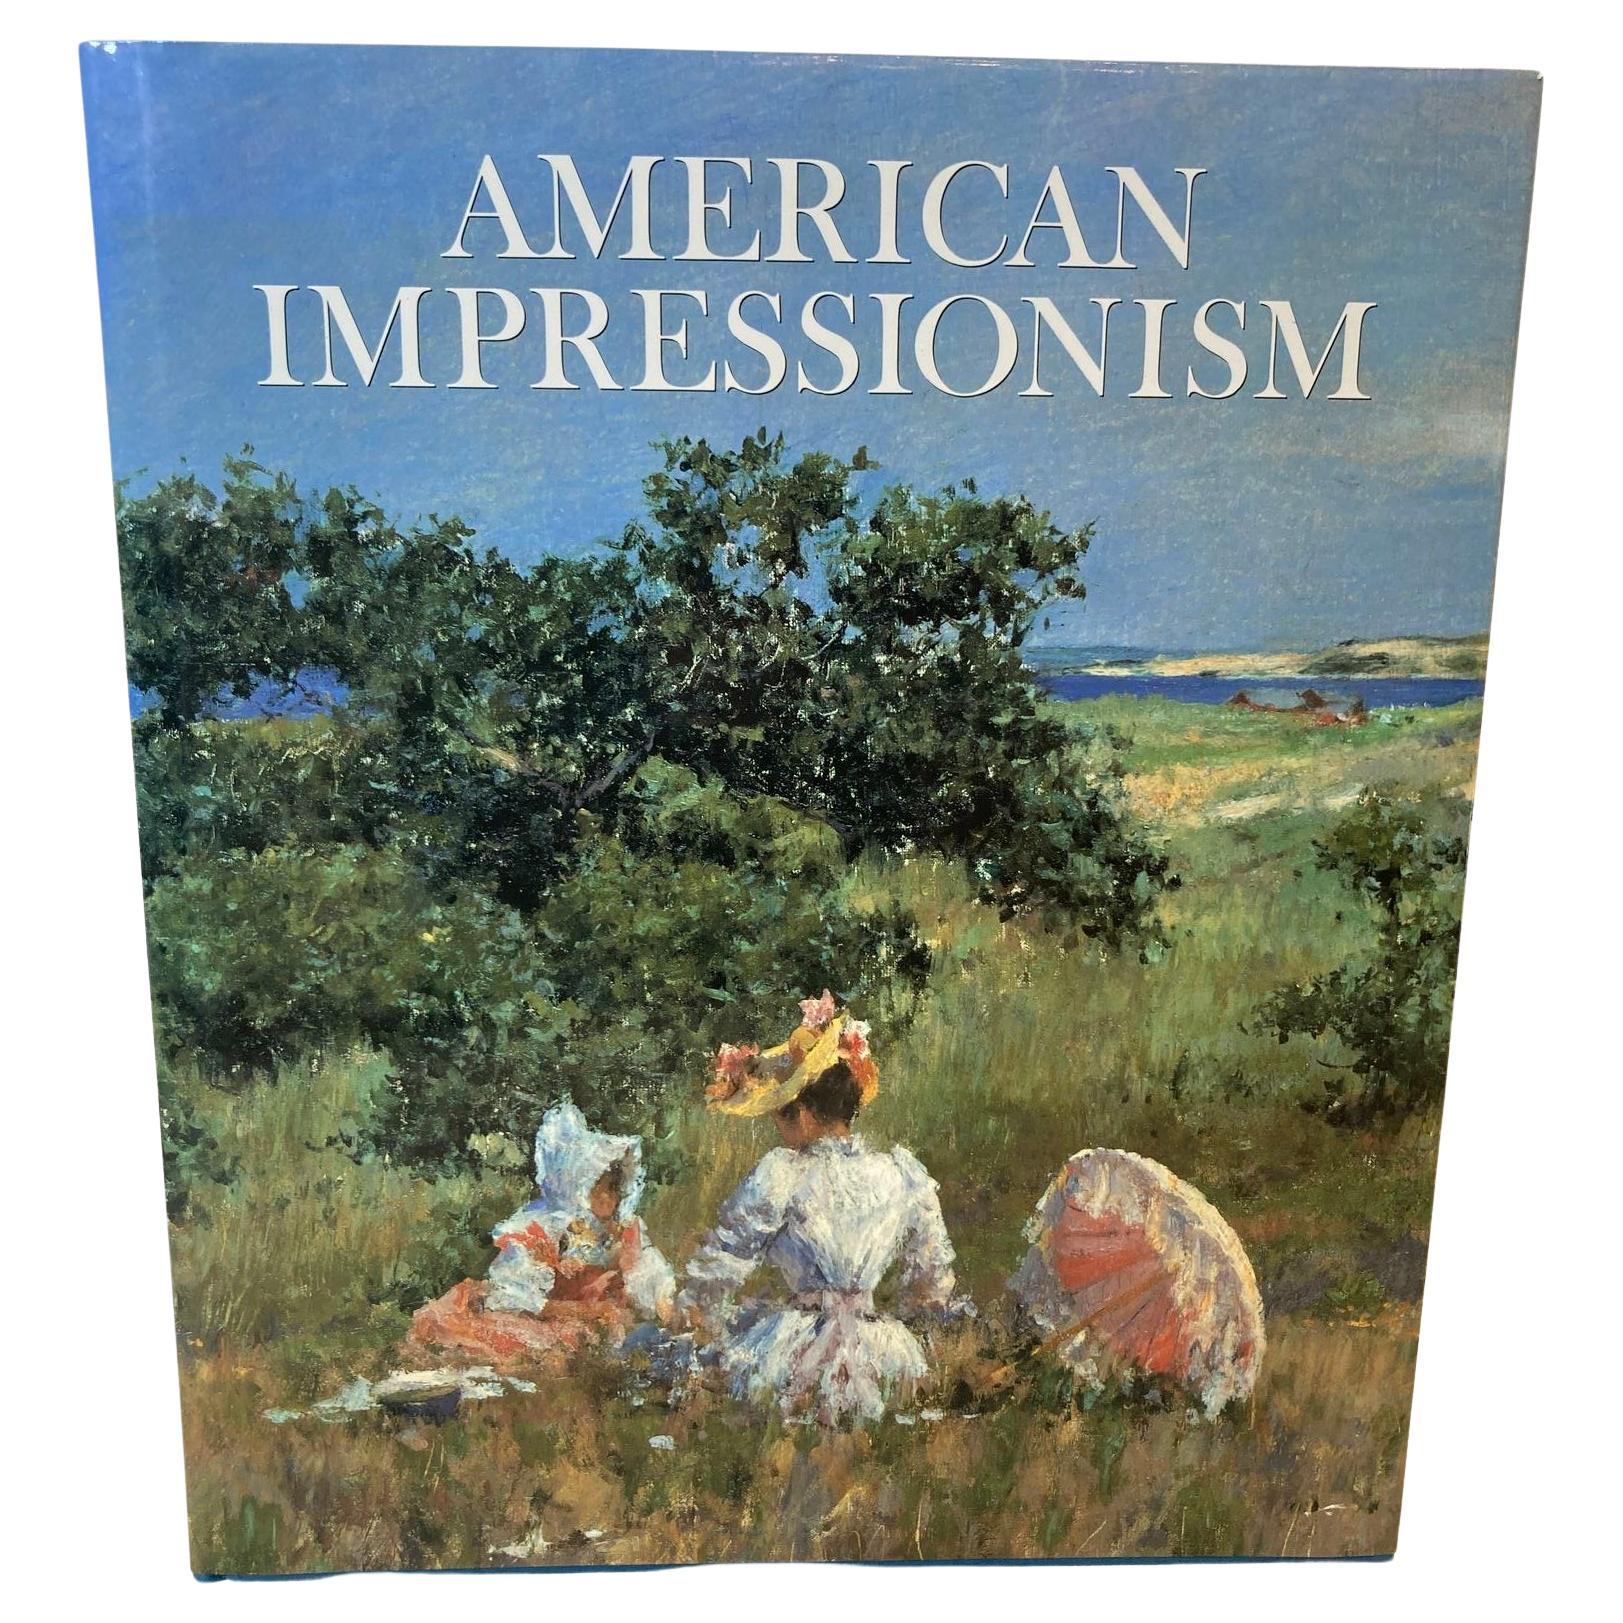 American Impressionism Oversized Hardcover Book by William H. Gerdts